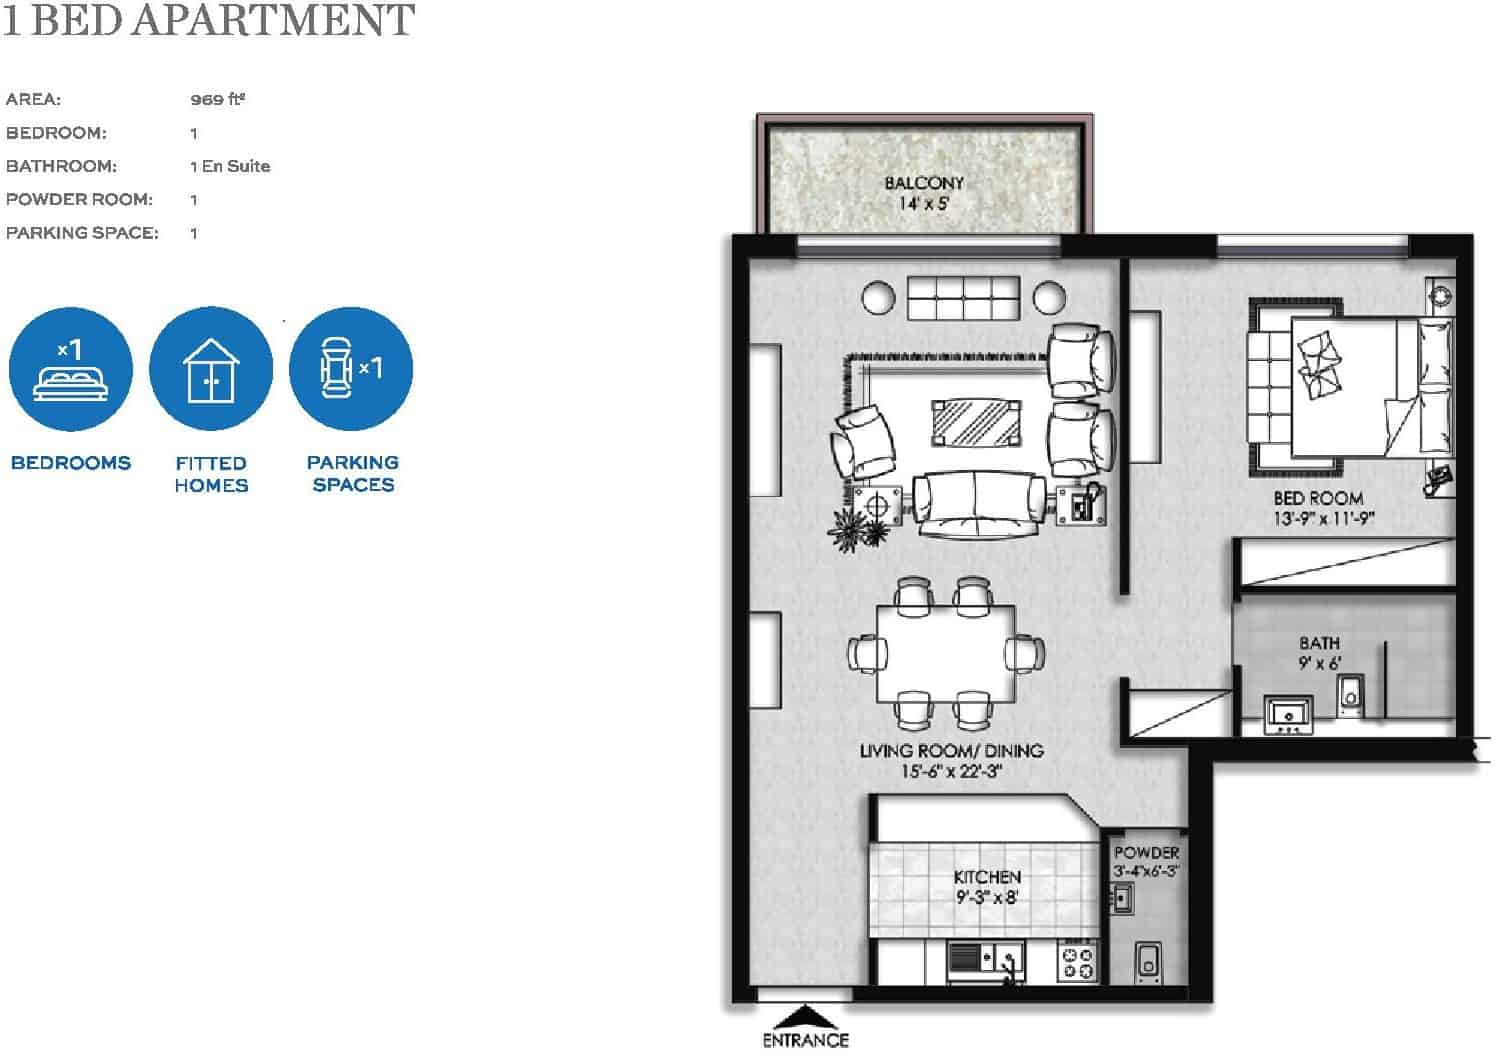 The Heights Eighteen 1 Bed Apartment Layout Plan